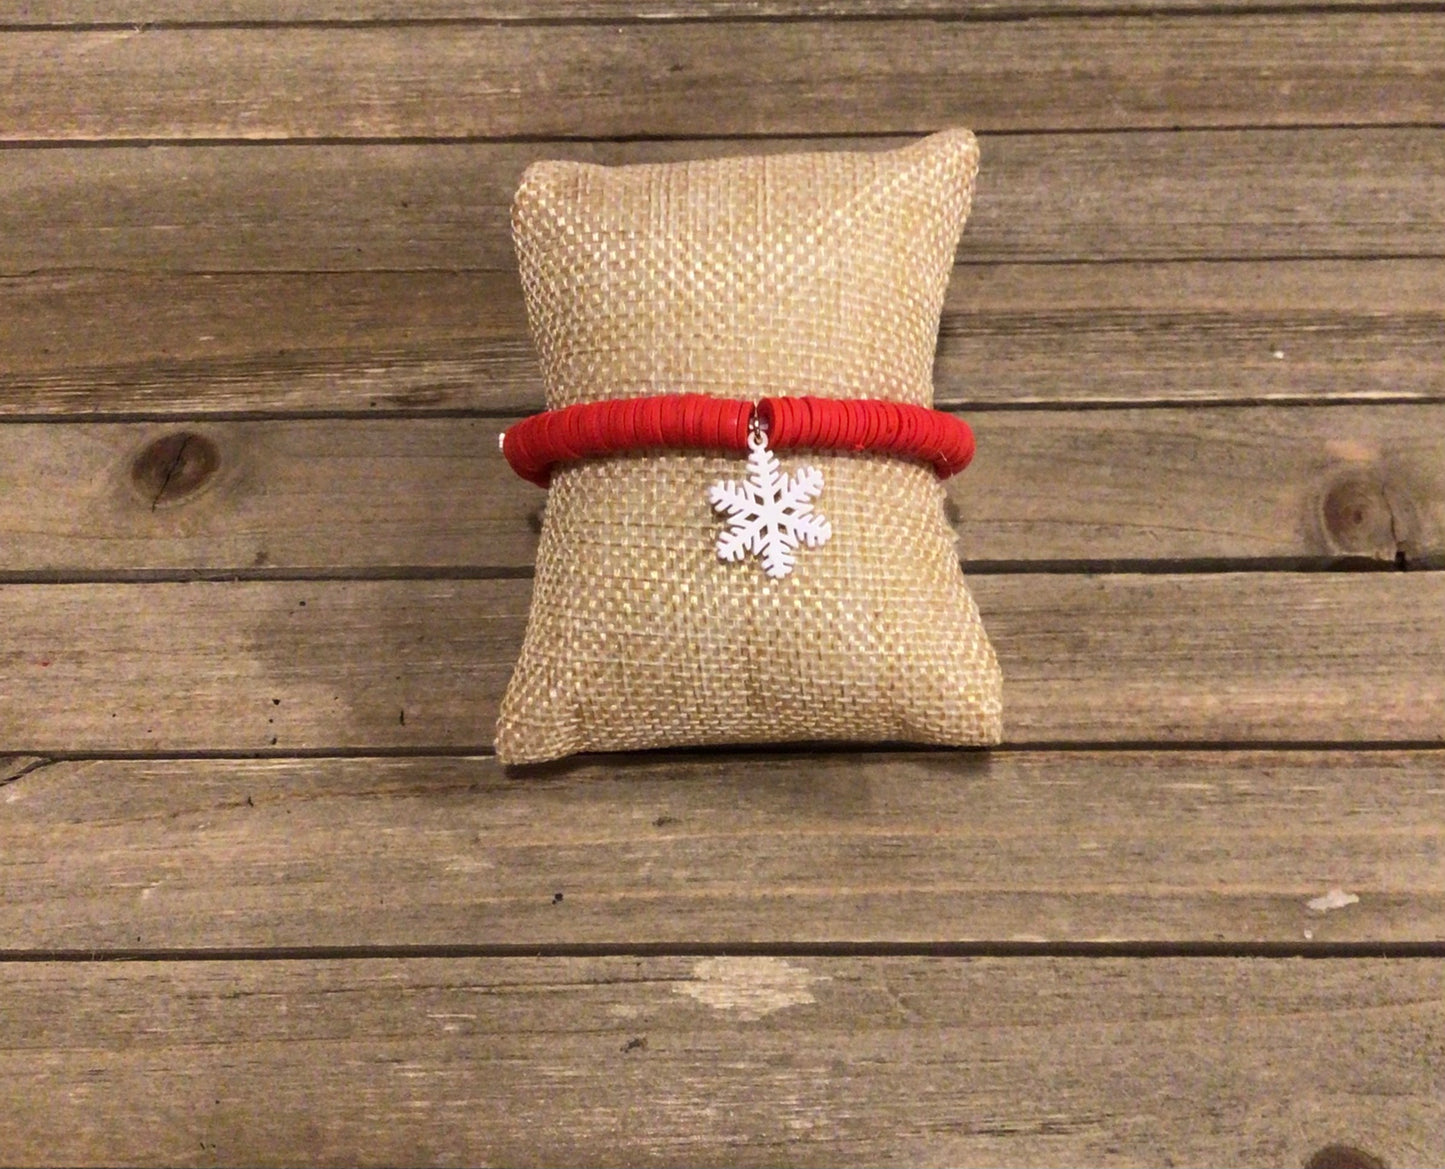 Kid's Red Sequin Stretch Bracelet With Snowflake Charm